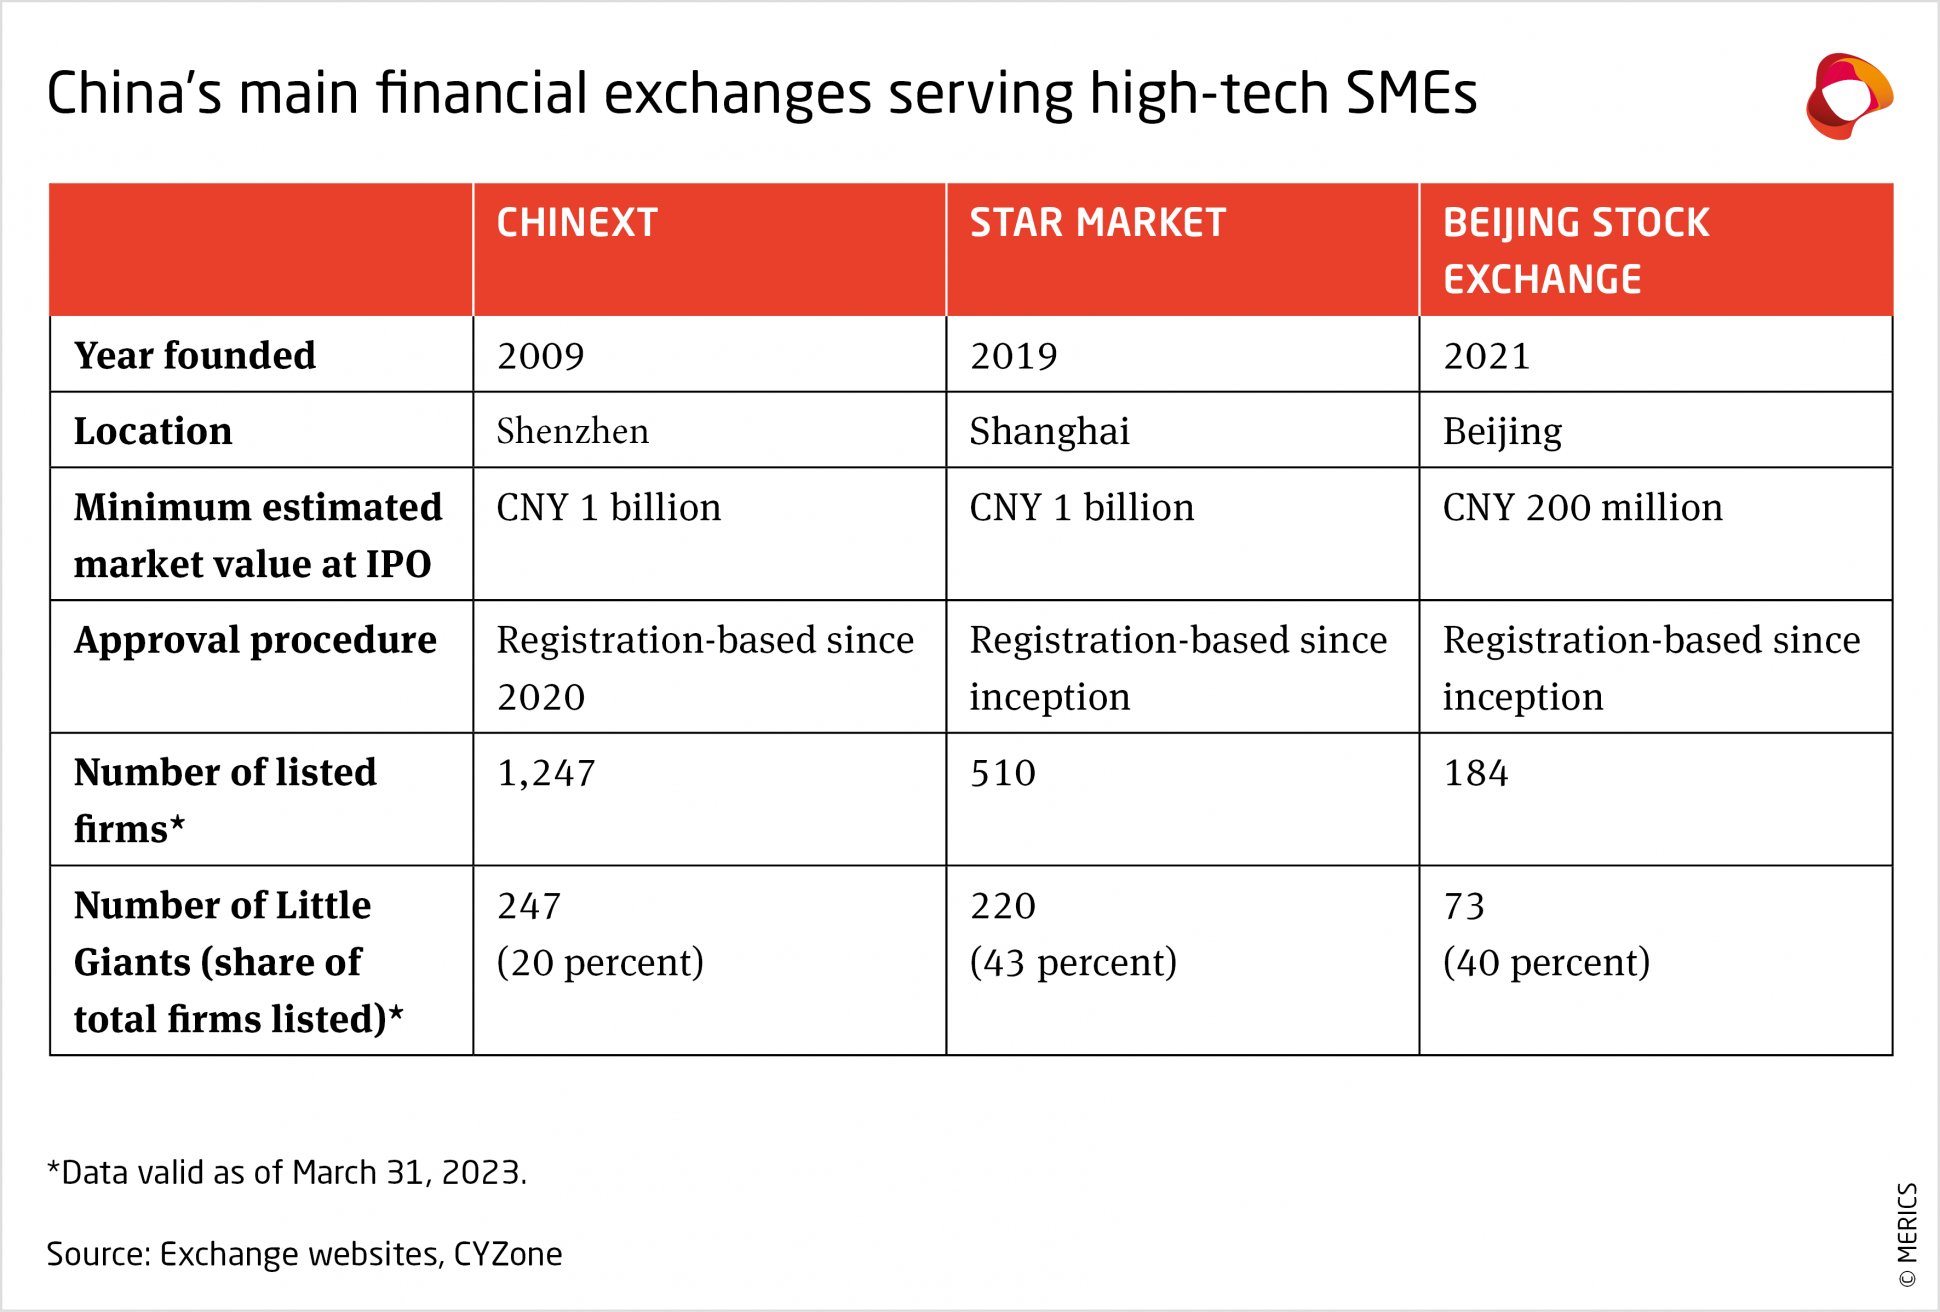 merics-report-accelerator-state-chinas-main-financial-exchanges-serving-high-tech-SMEs.png